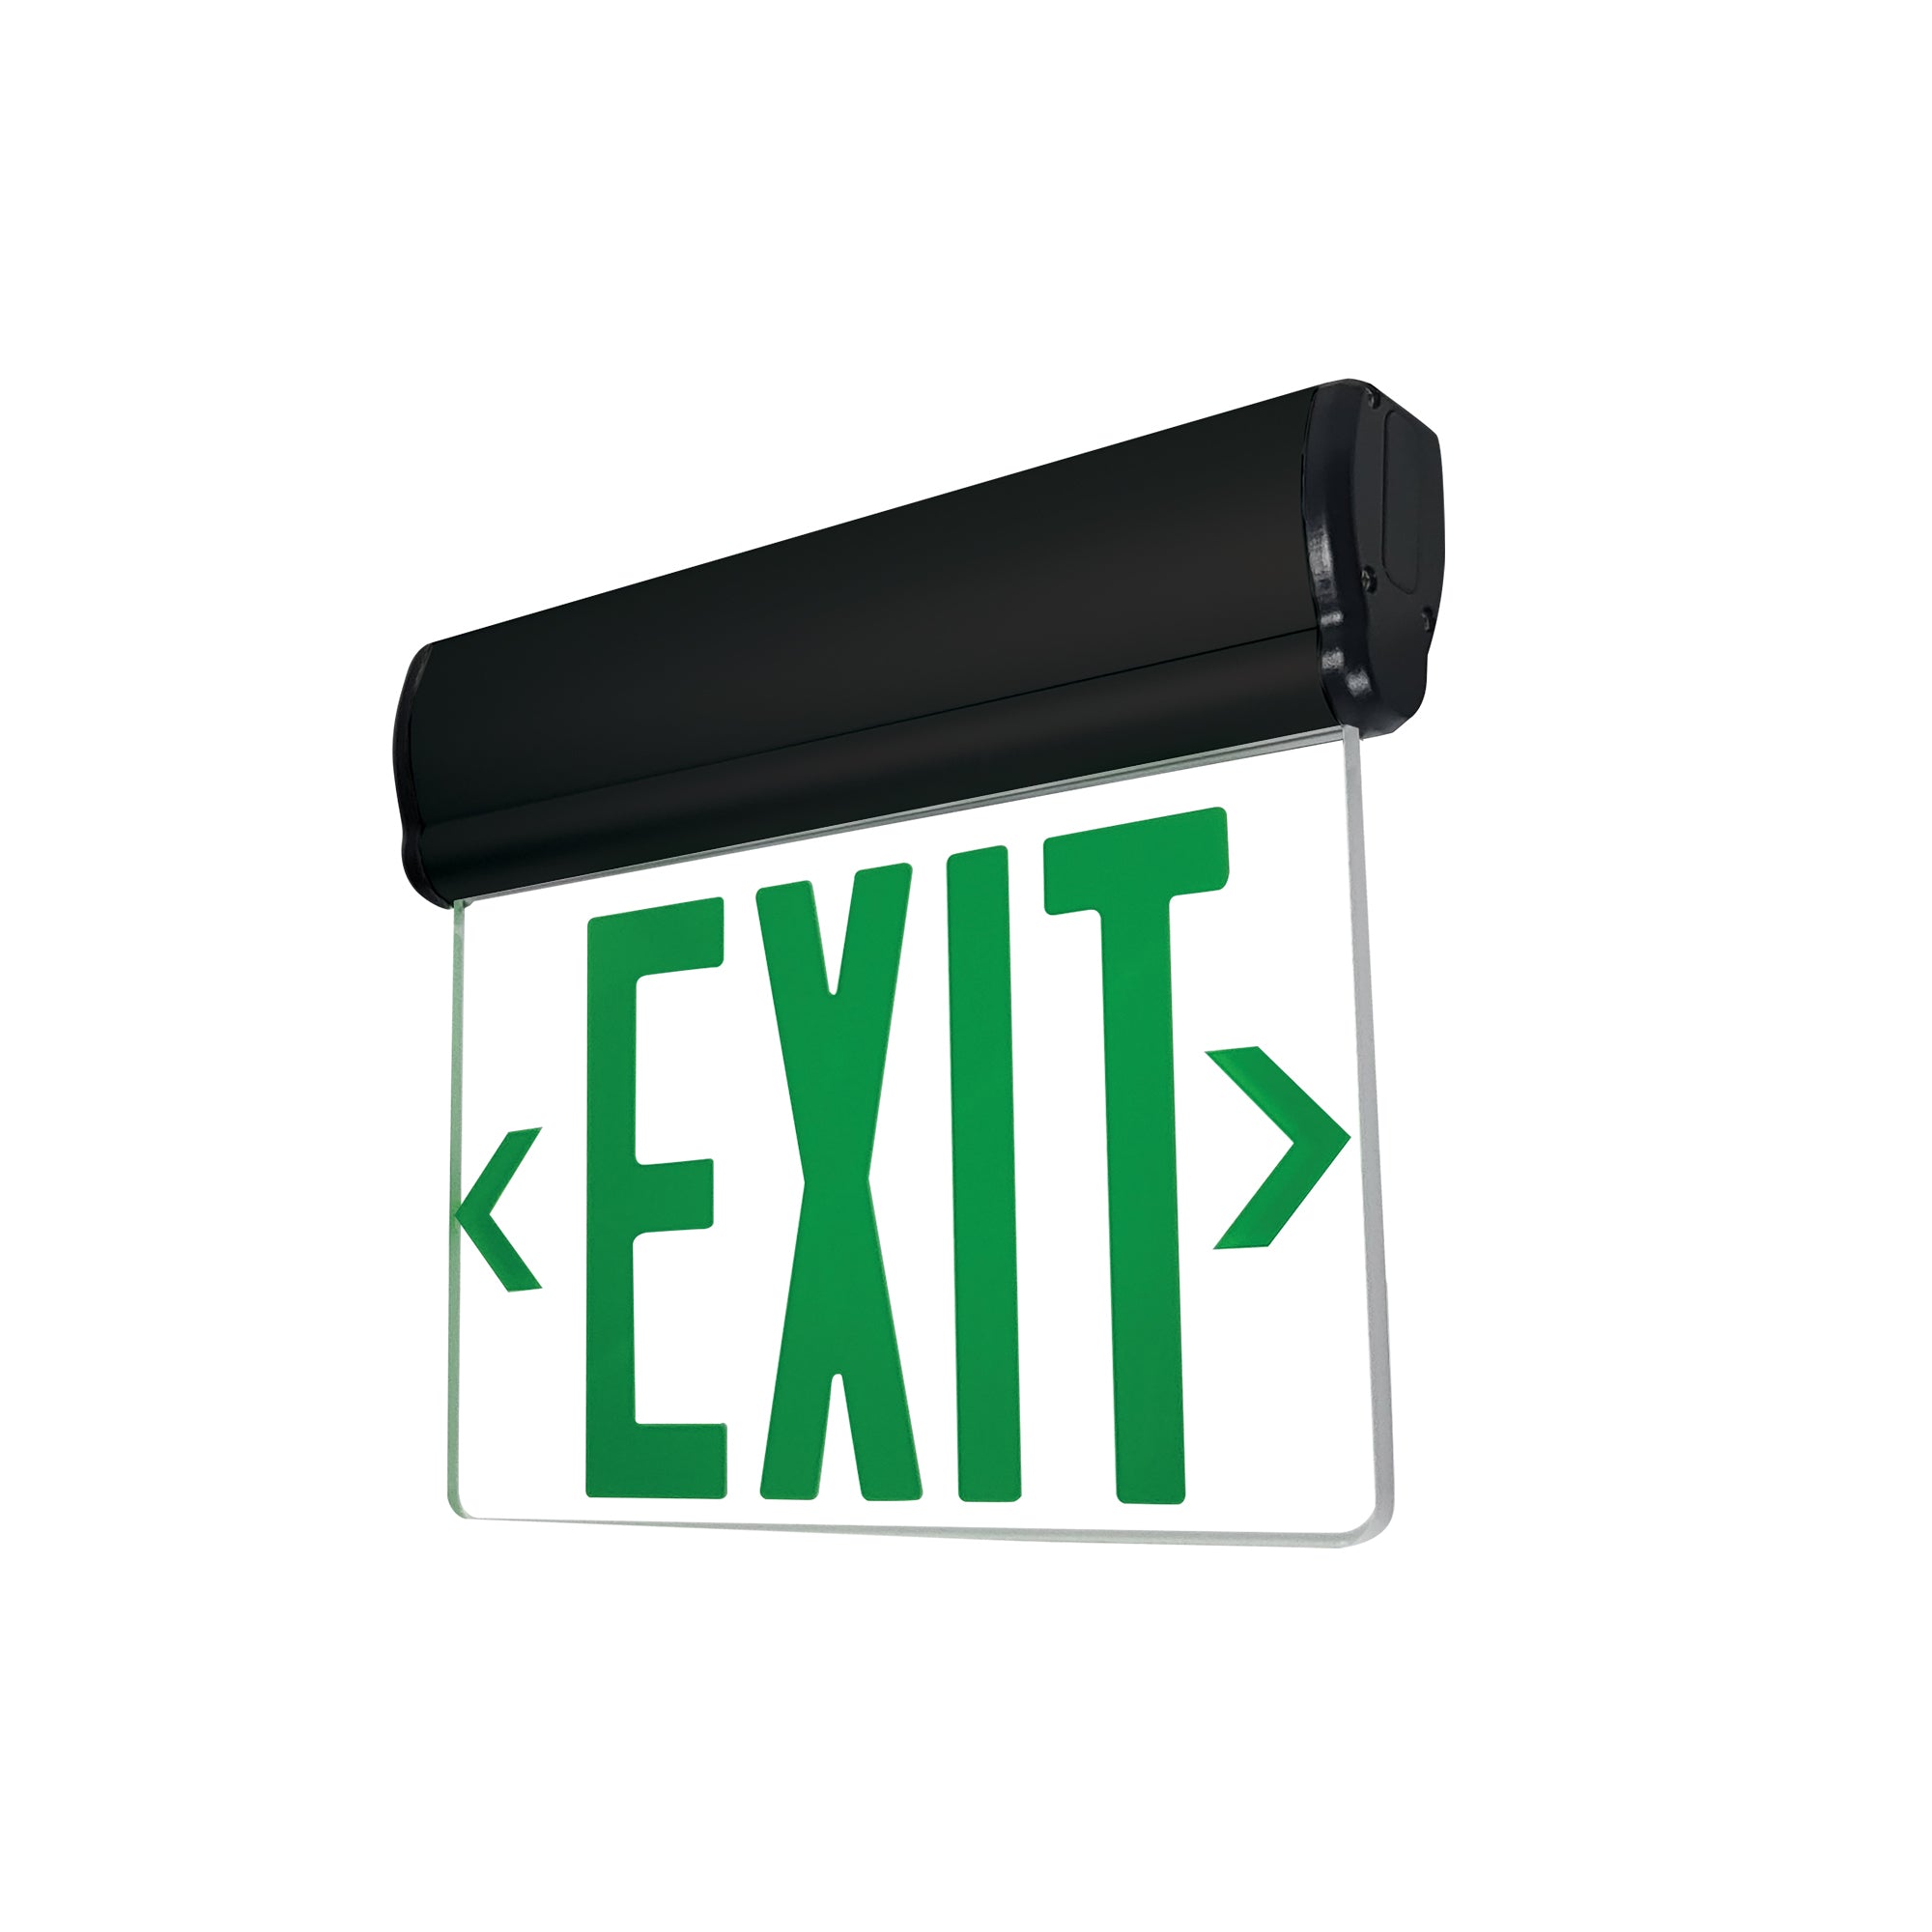 Nora Lighting NX-812-LEDGCB - Exit / Emergency - Surface Adjustable LED Edge-Lit Exit Sign, Battery Backup, 6 Inch Green Letters, Single Face / Clear Acrylic, Black Housing